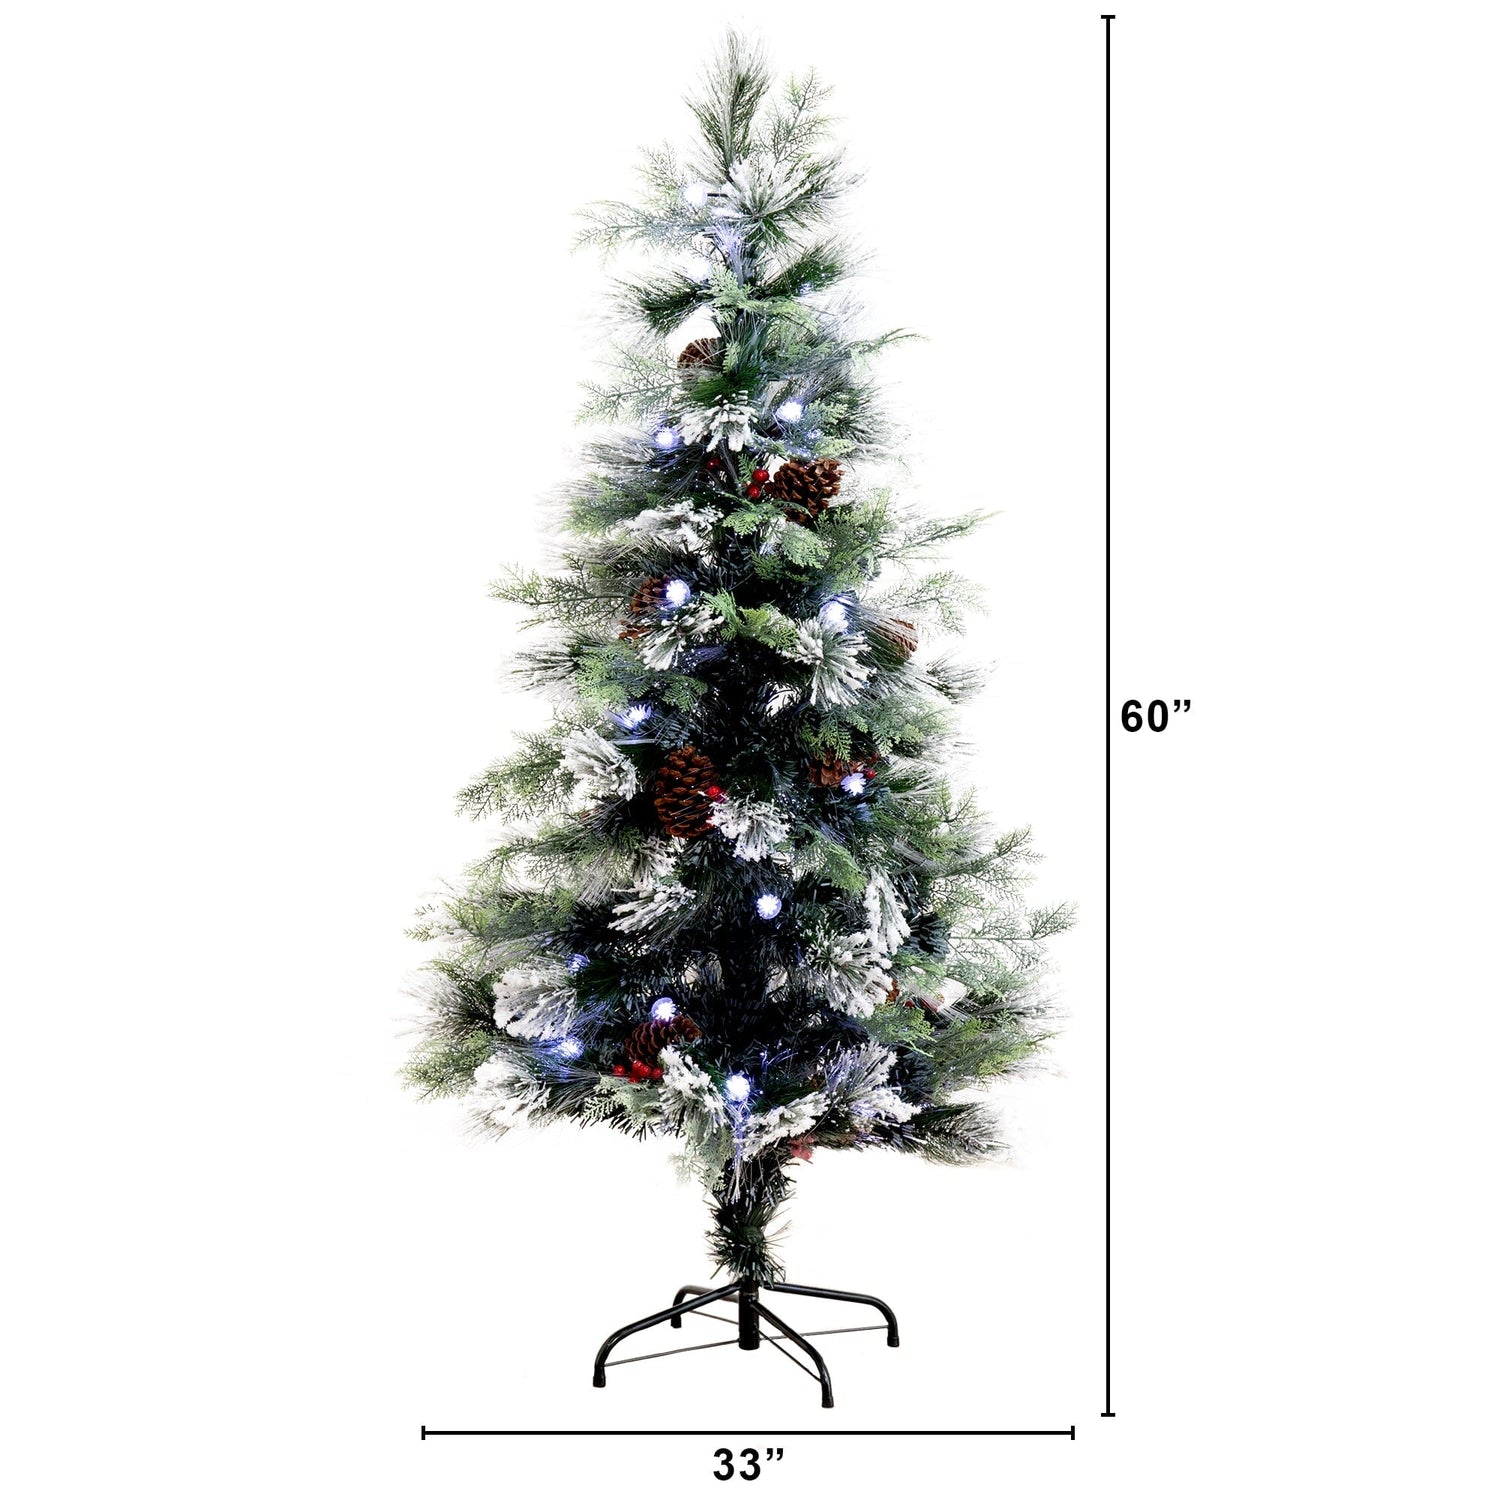 5' Flocked Pre-Lit Fiber Optic Artificial Pinecone & Berries Christmas Tree with 48 White LED Lights